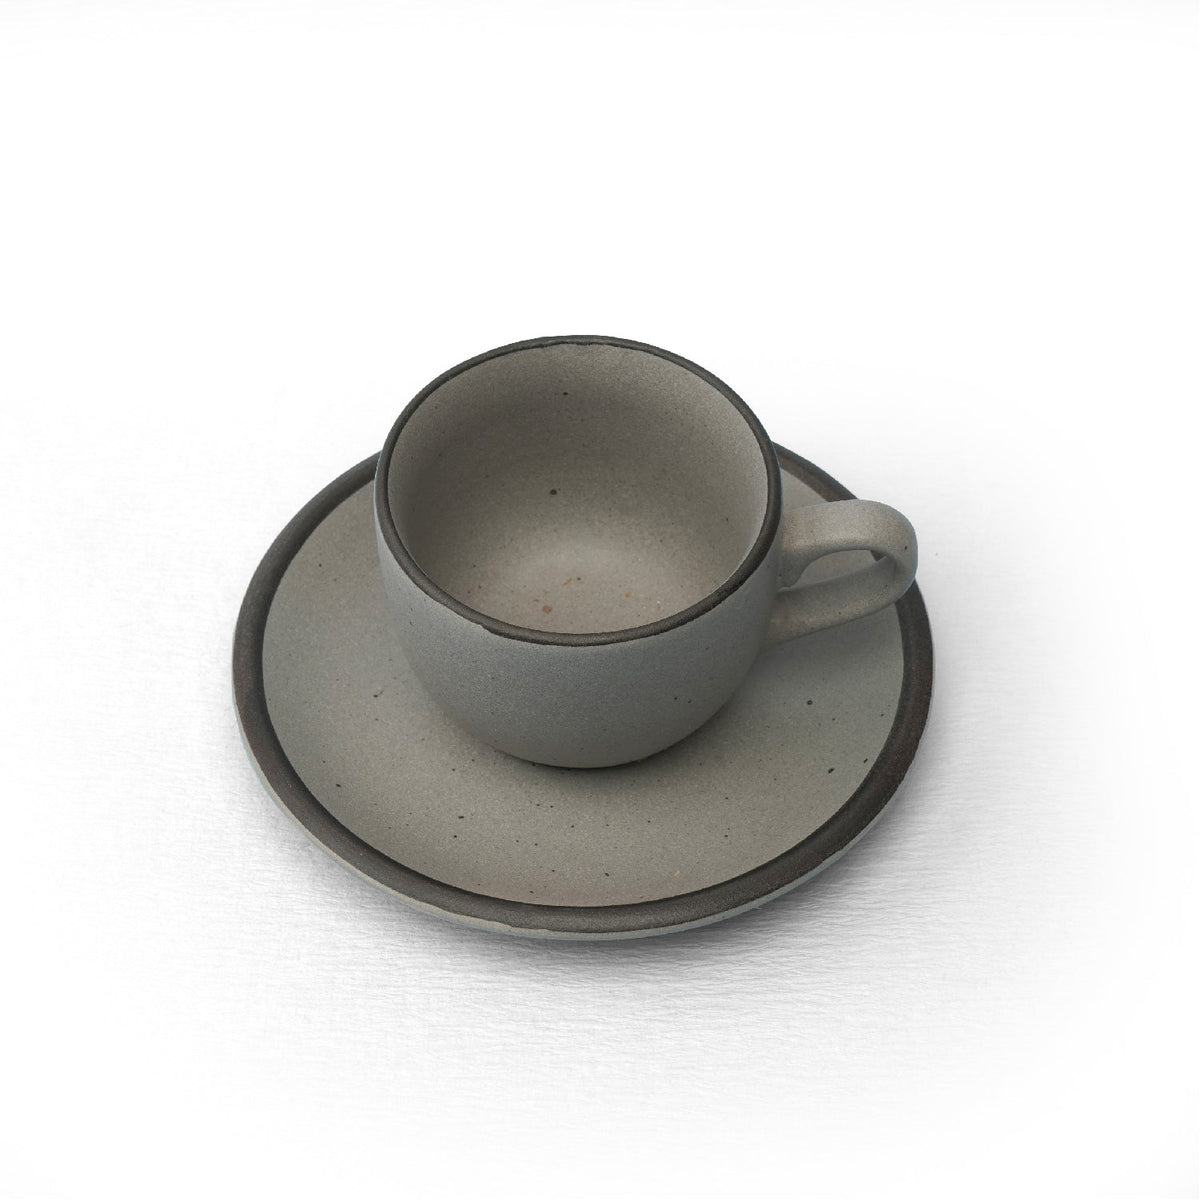 Claymistry Ceramic Saucer and Cup Combo | Classic Black Cupset | Set of 6 | Coffee Mugs | Ceramic Combos | Tea Kettles